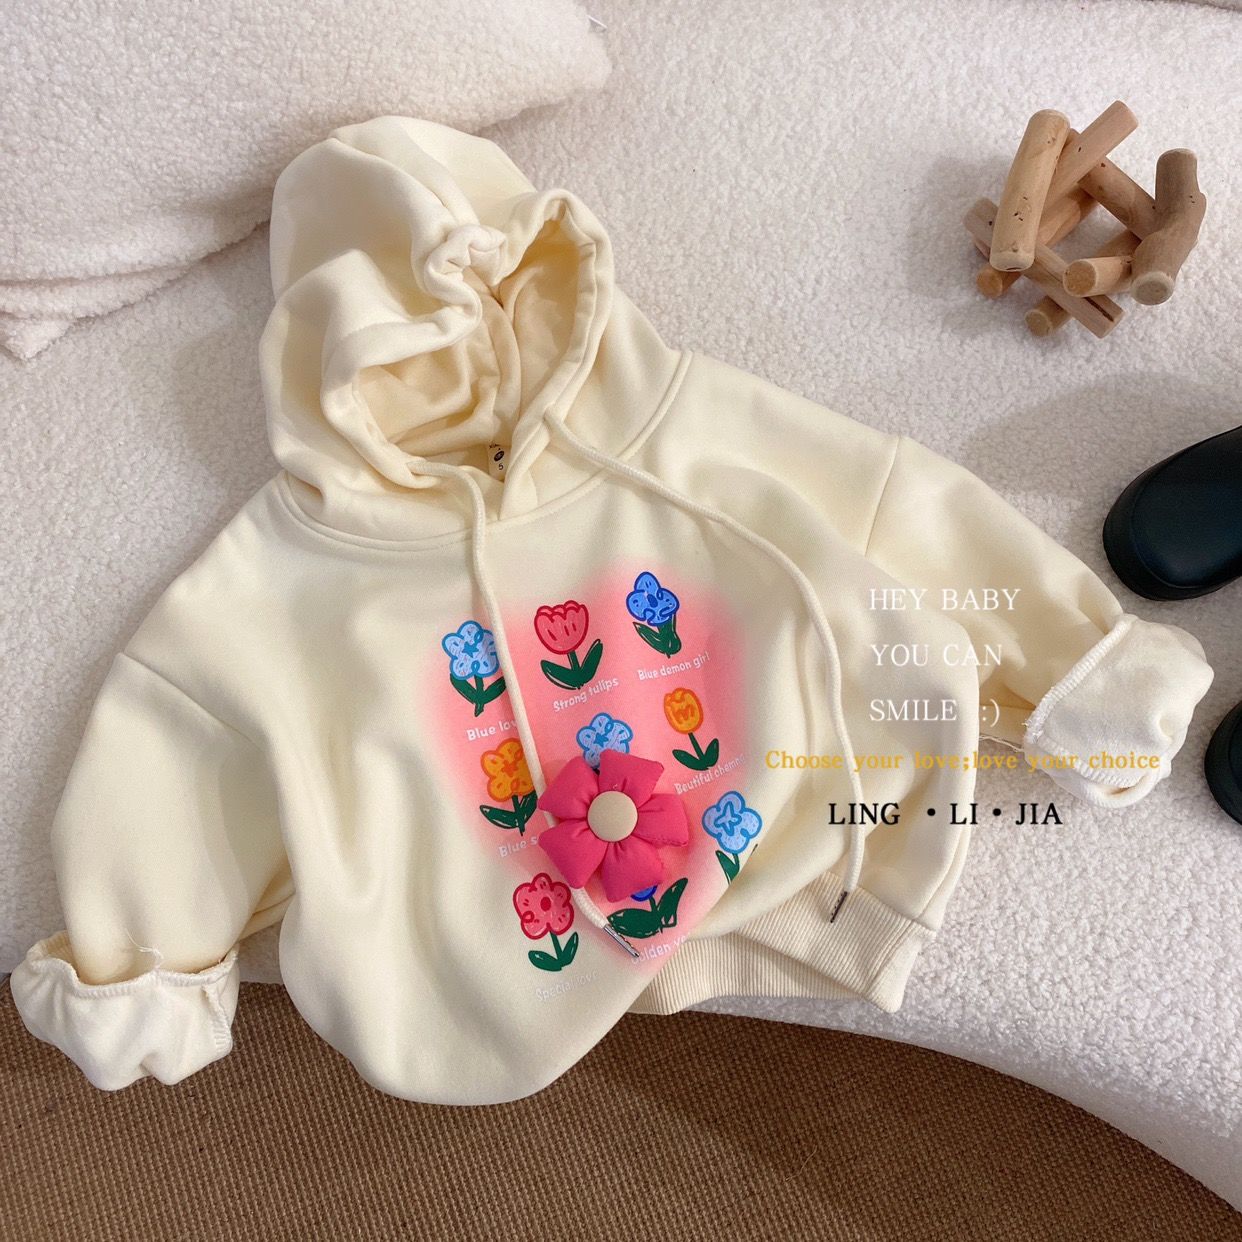 Warehouse clearance big label cut label [three-dimensional flowers] autumn plus velvet thickened children's hooded sweater jacket jacket